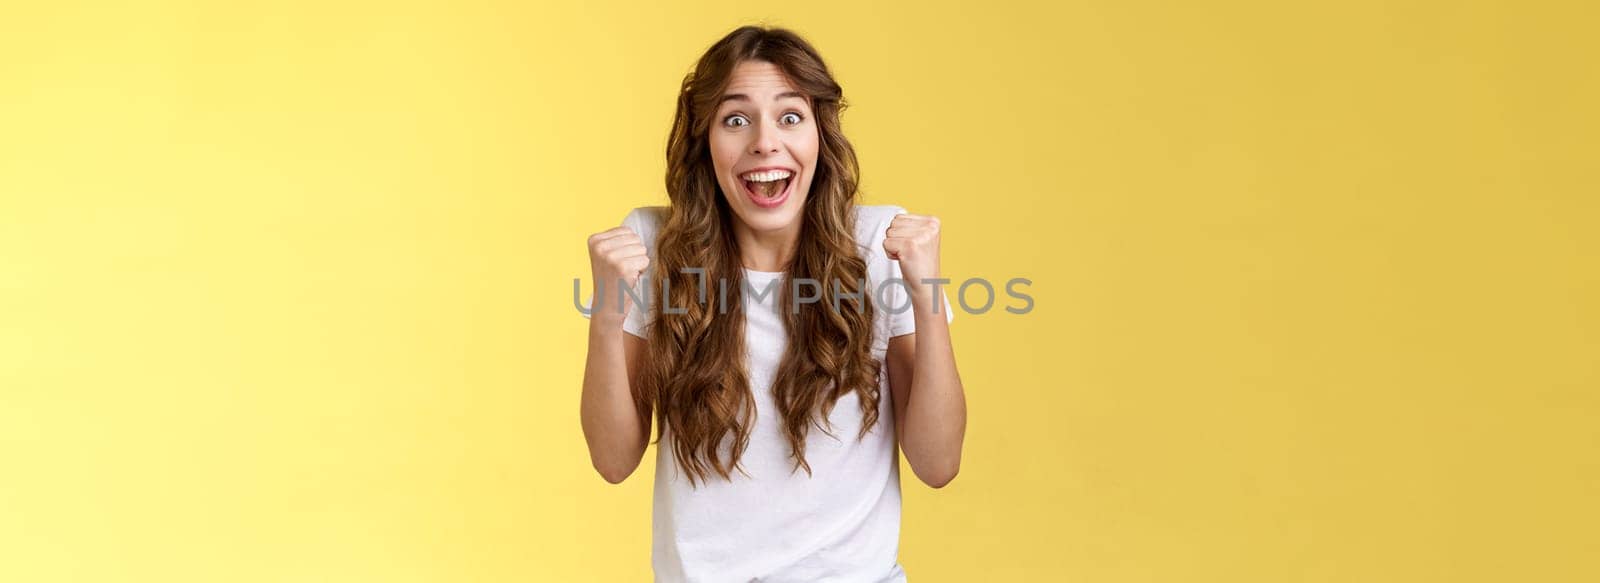 Cheerful supportive happy female fun fist pump relieved triumphing cheering rooting for favorite team winning smiling broadly hopefully look camera celebrating victory yellow background.